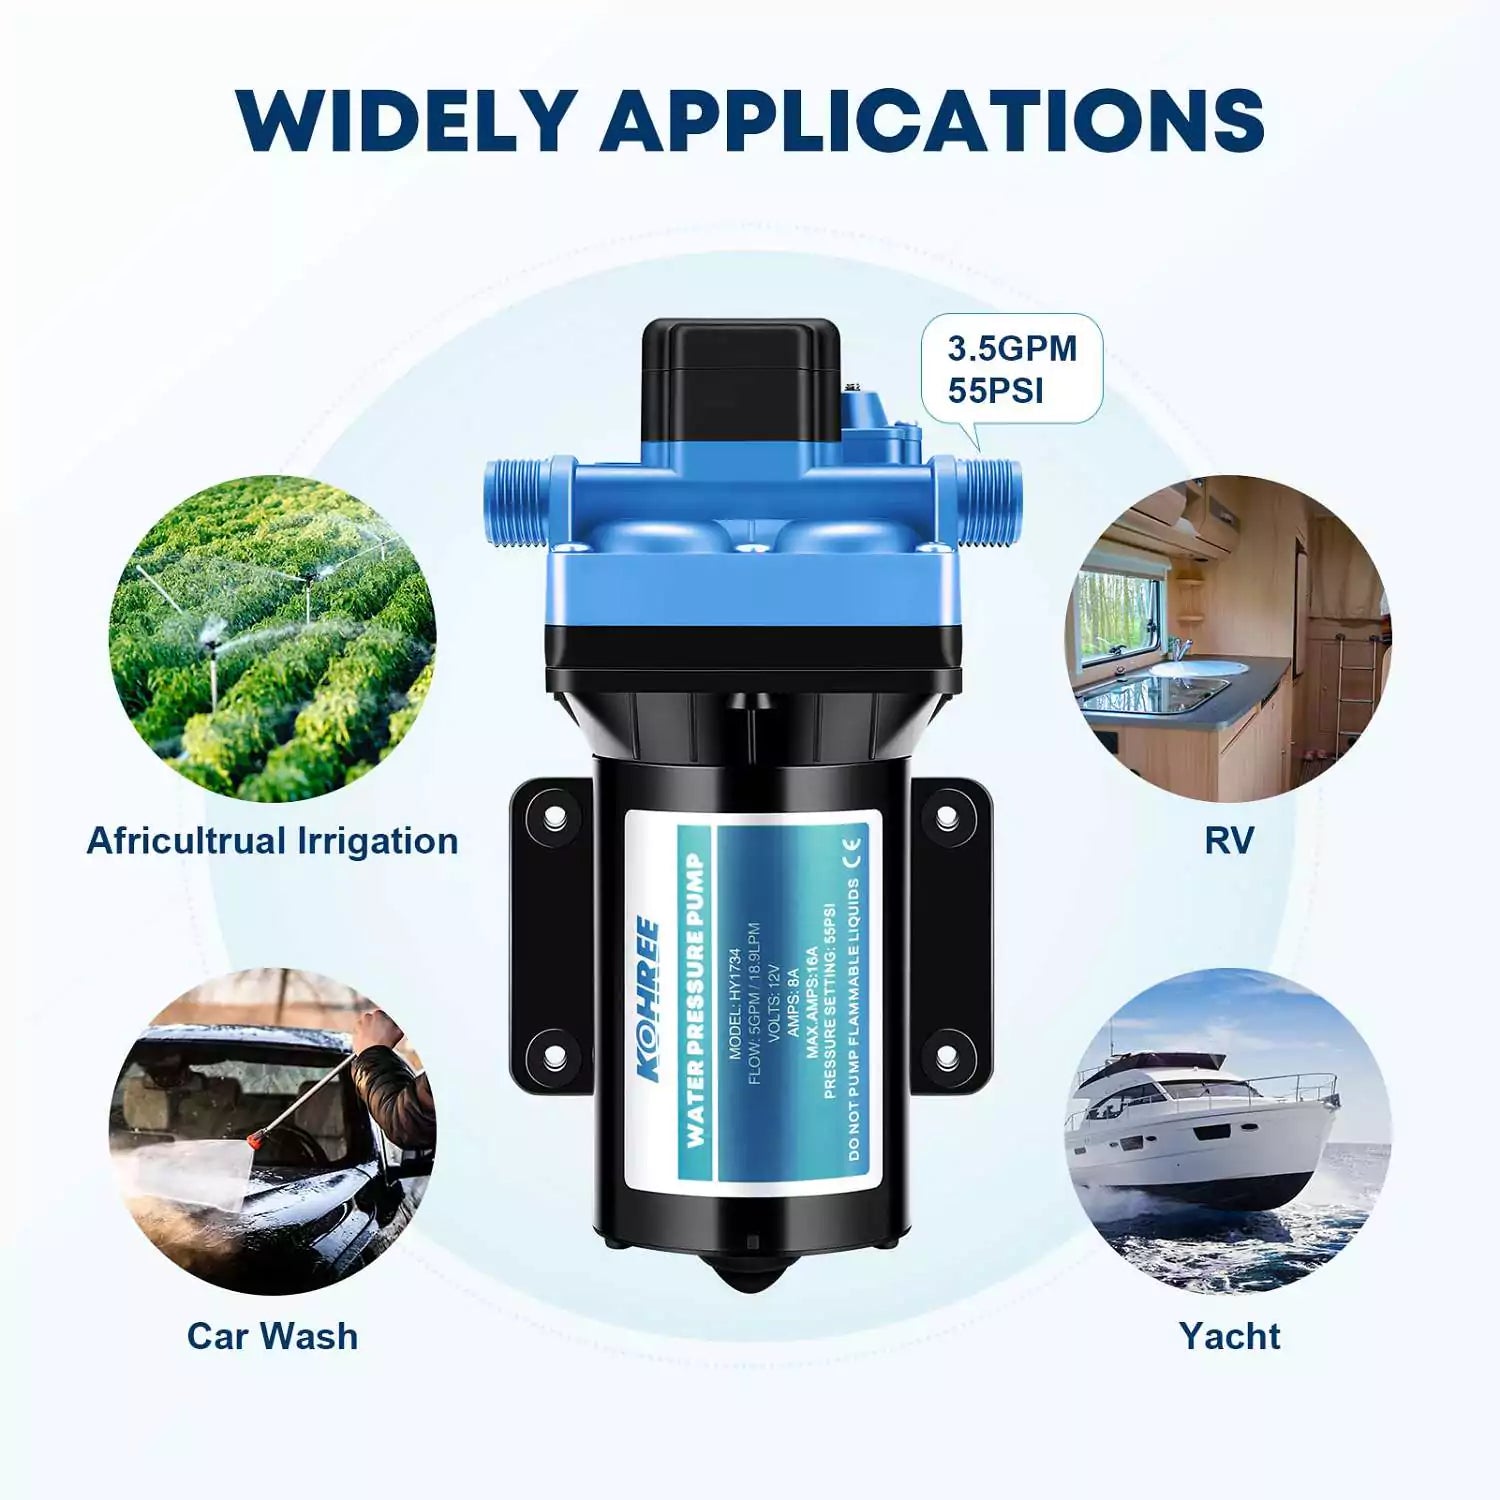 Widely applications of water pump in RV 3.5 gpm